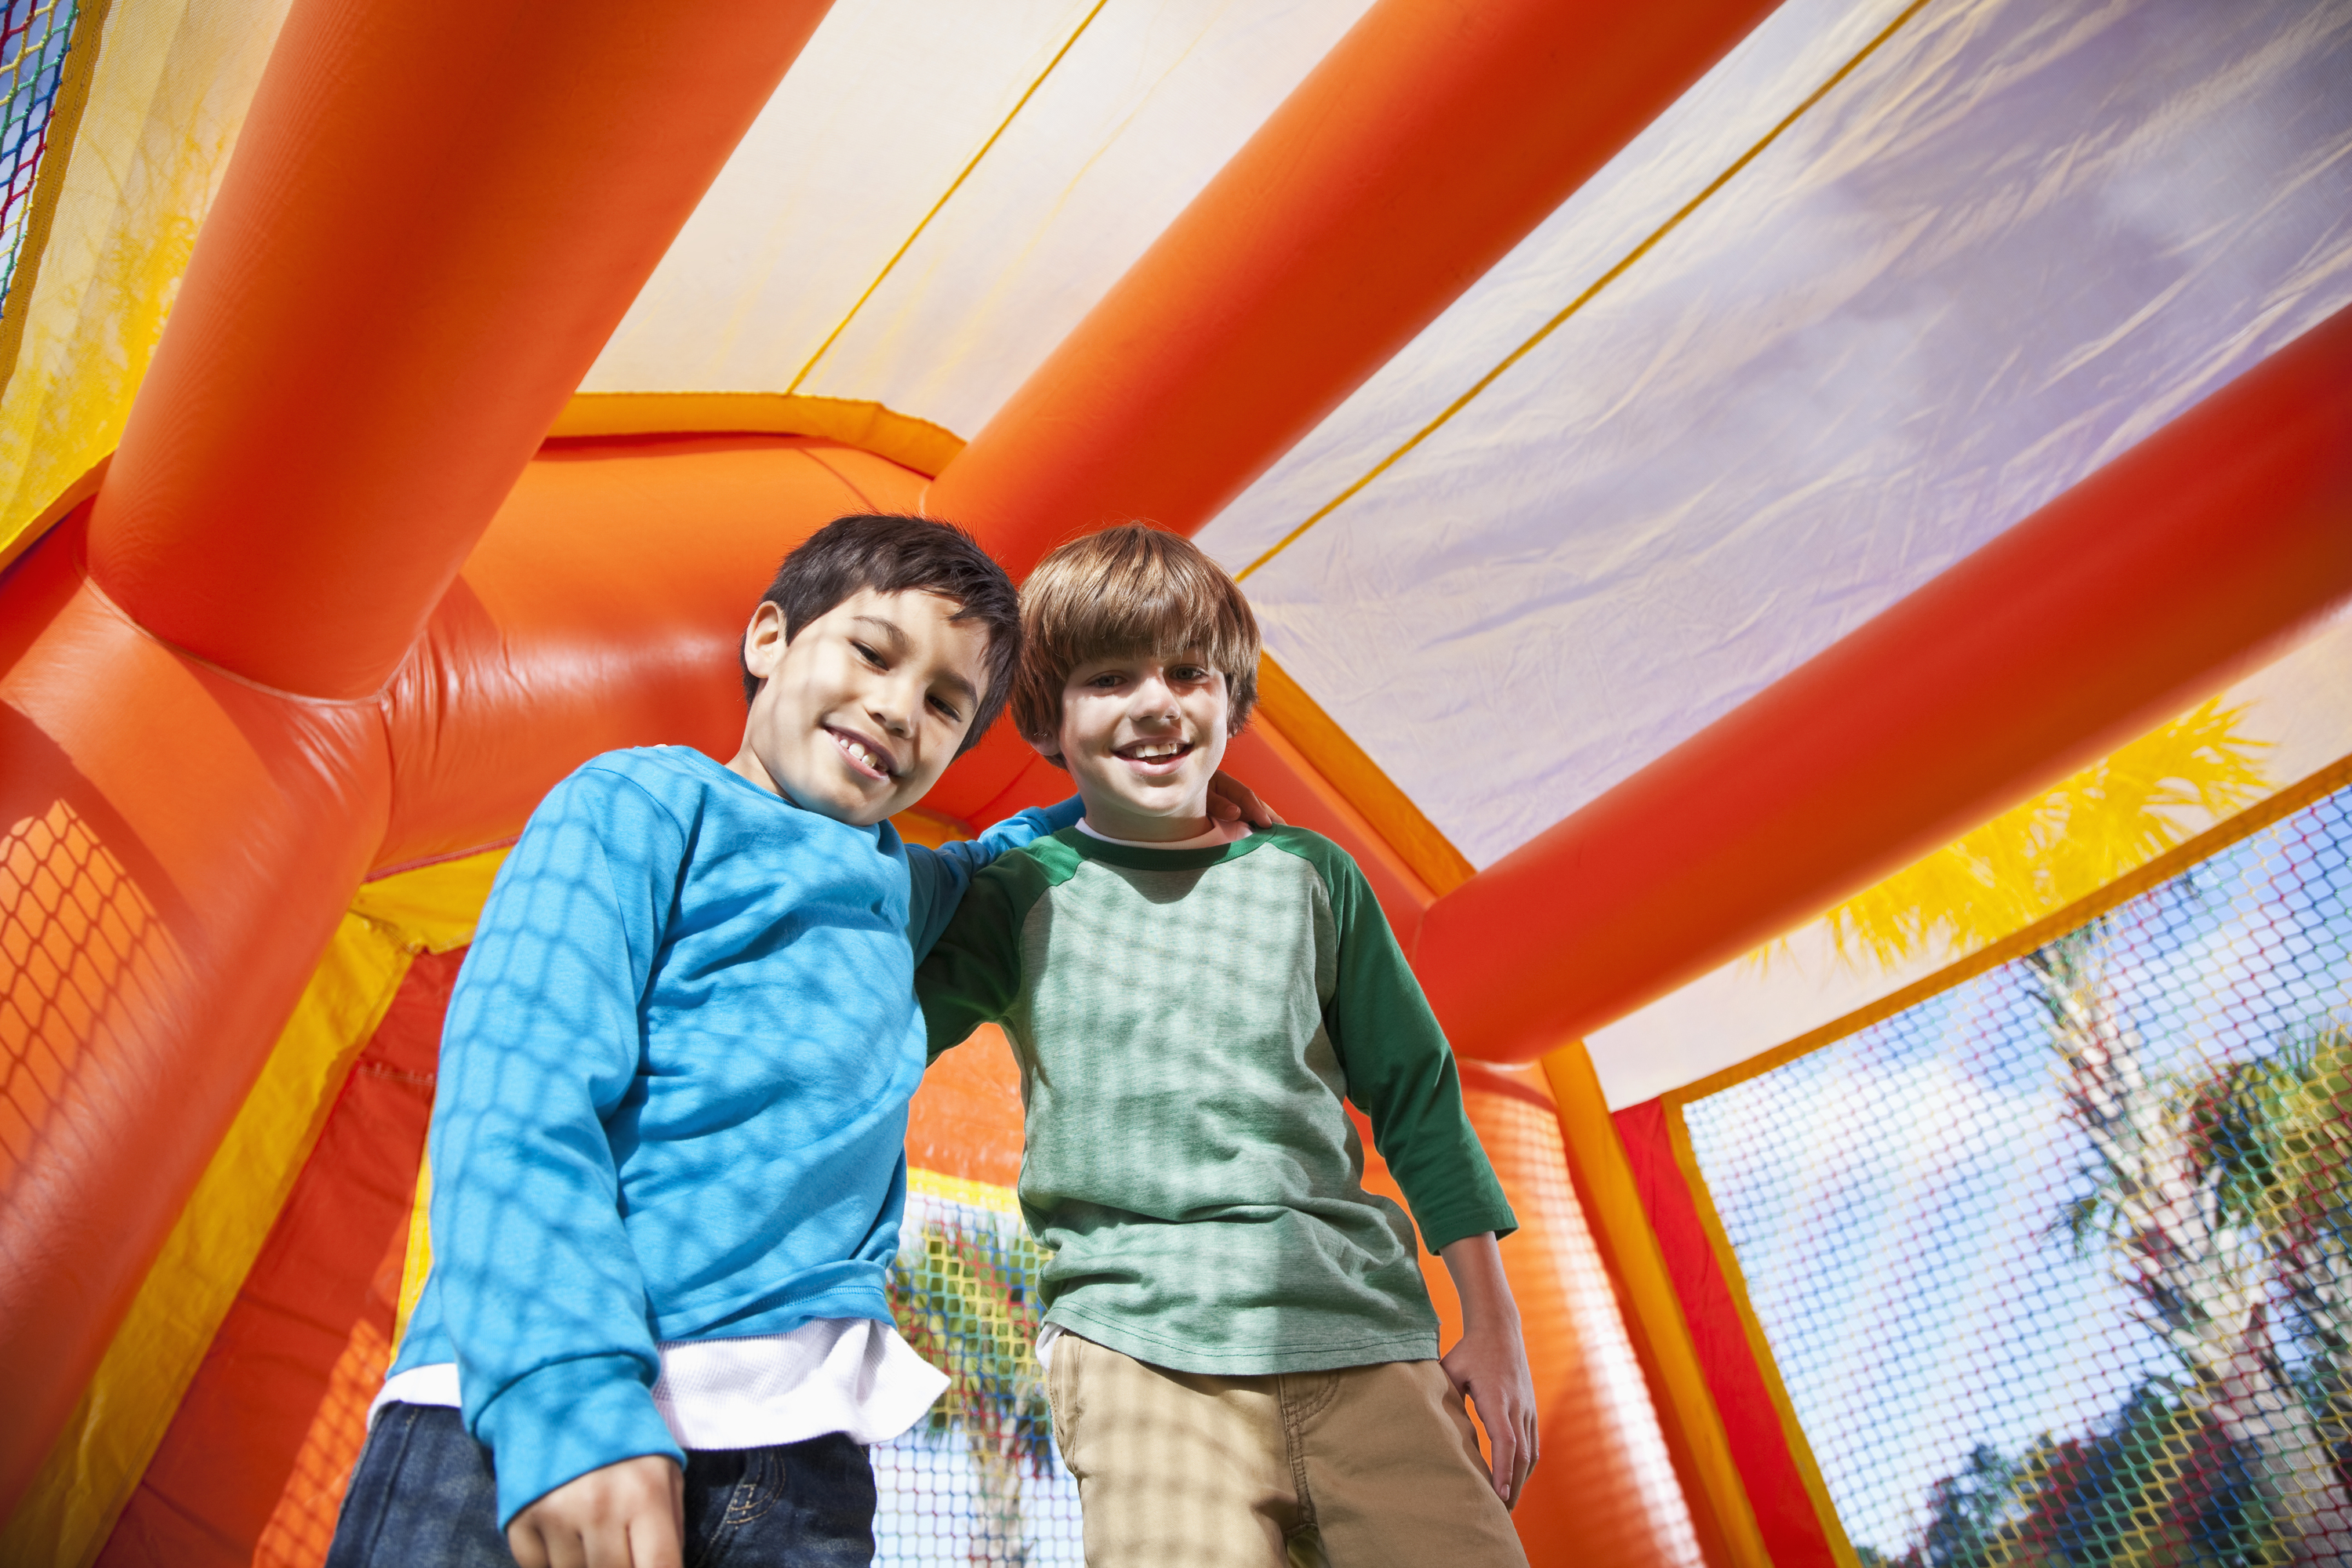 Friend love to hang out in Inflatable Bounce Houses